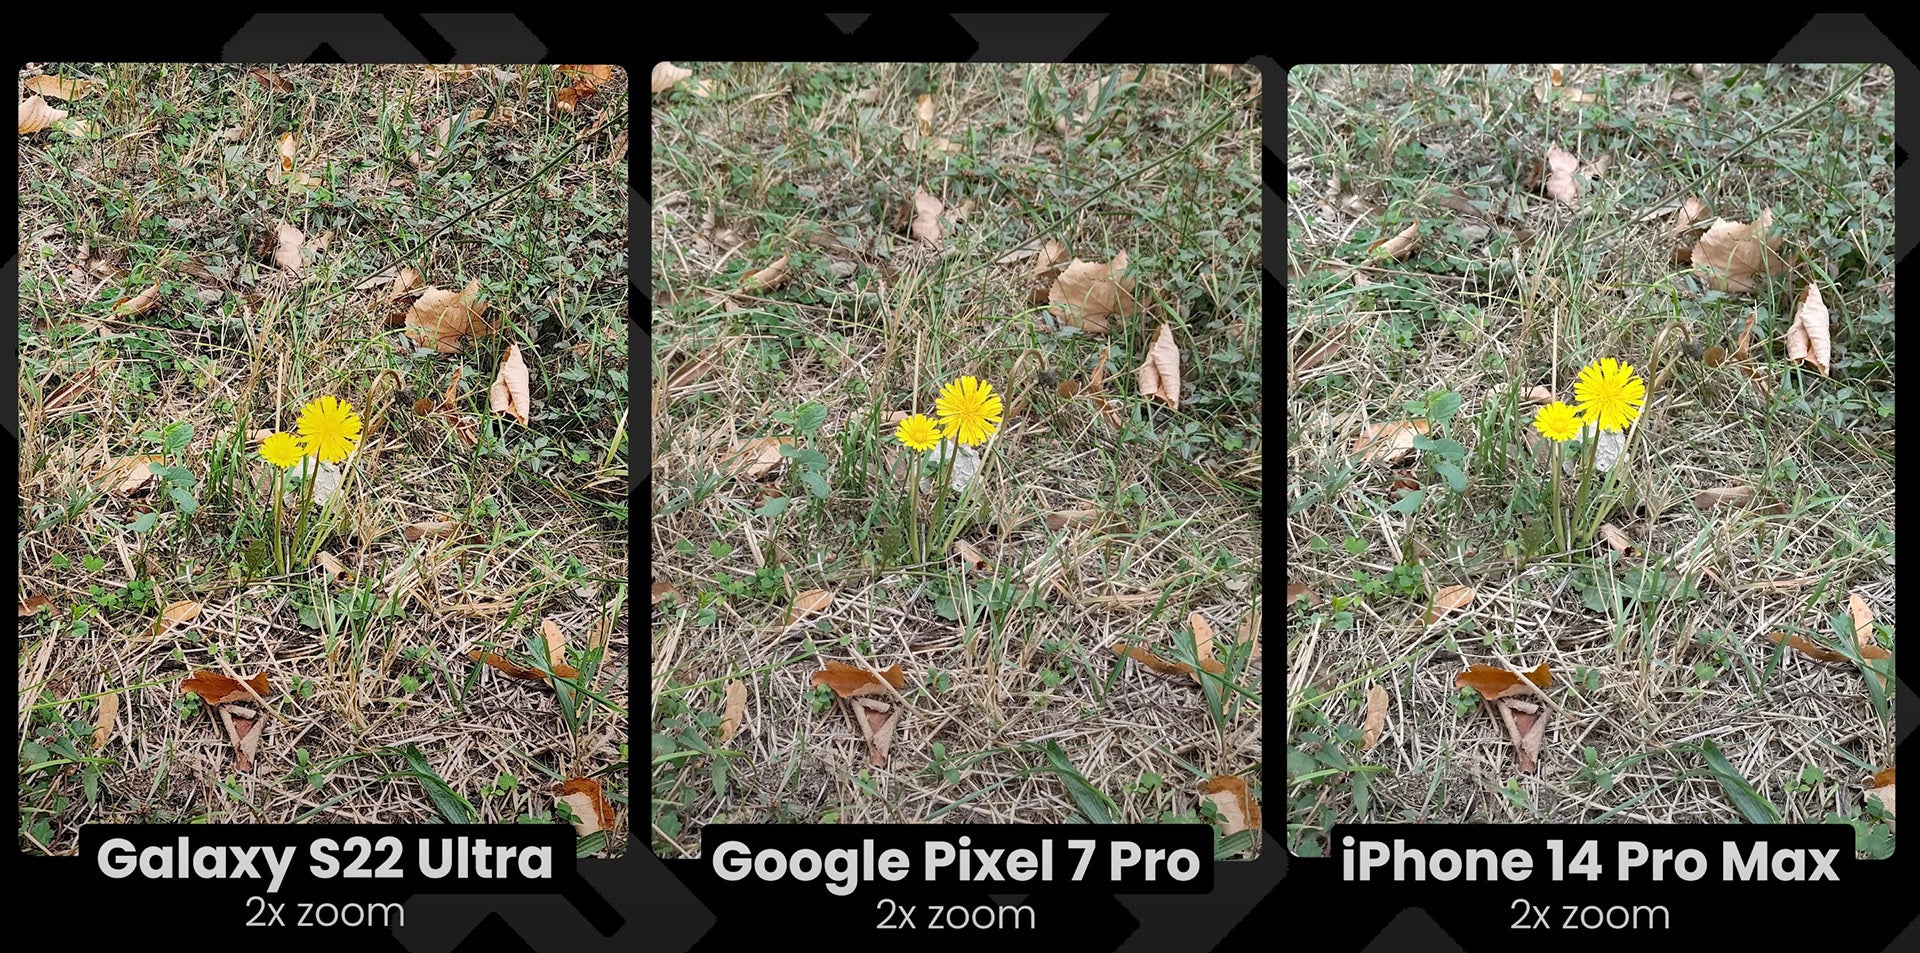 (Image Credit - PhoneArena) Despite having the highest resolution sensor, the Galaxy S22 Ultra captures 2x less detail than the iPhone 14 Pro and Pixel 7 Pro - both Samsung and Xiaomi were caught by surprise, and the Apple 2X camera is very good